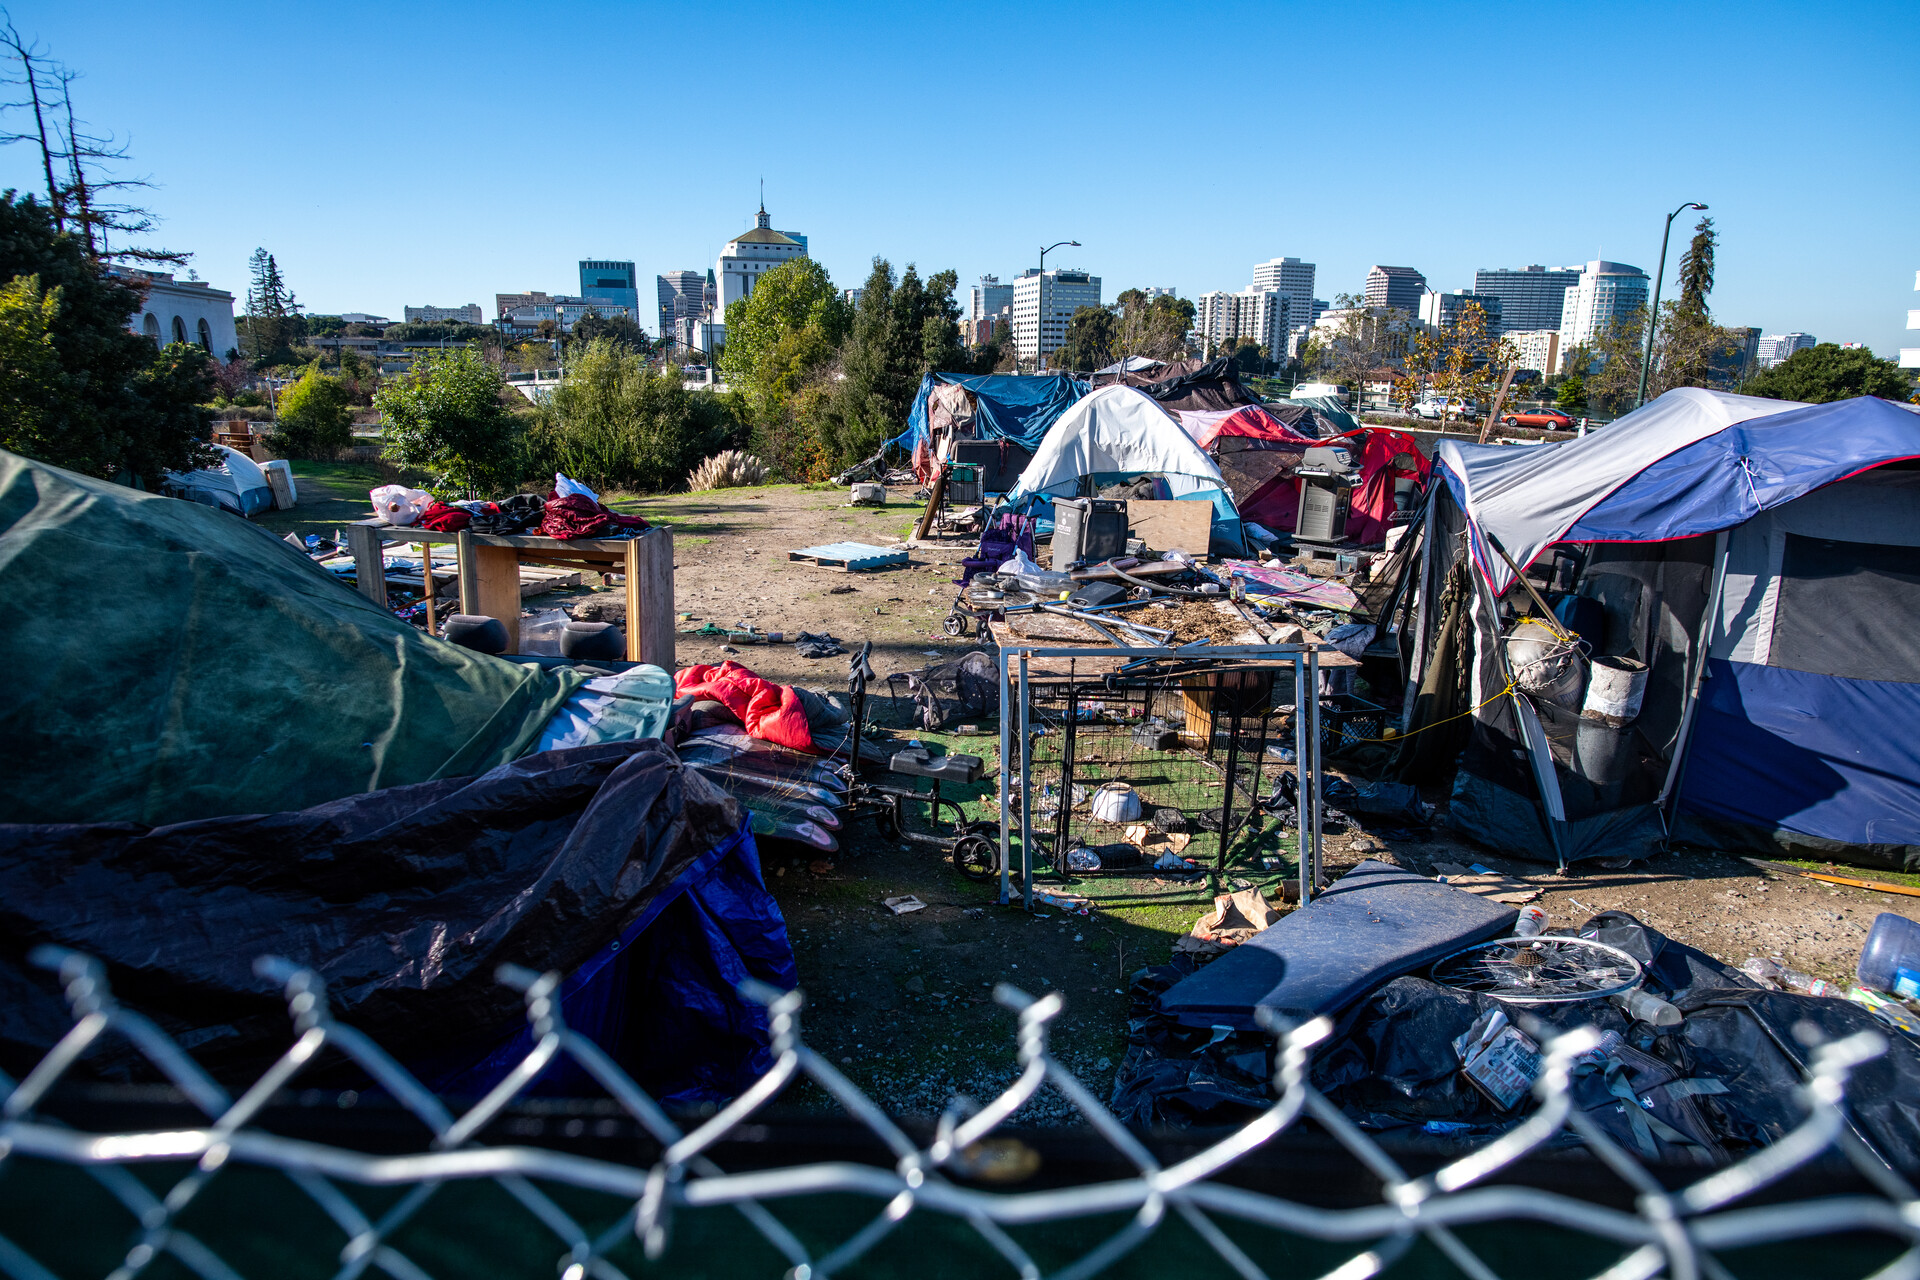 A tent encampment with miscellaneous items all over the ground. In the far background behind a row of trees is Oakland's skyline.